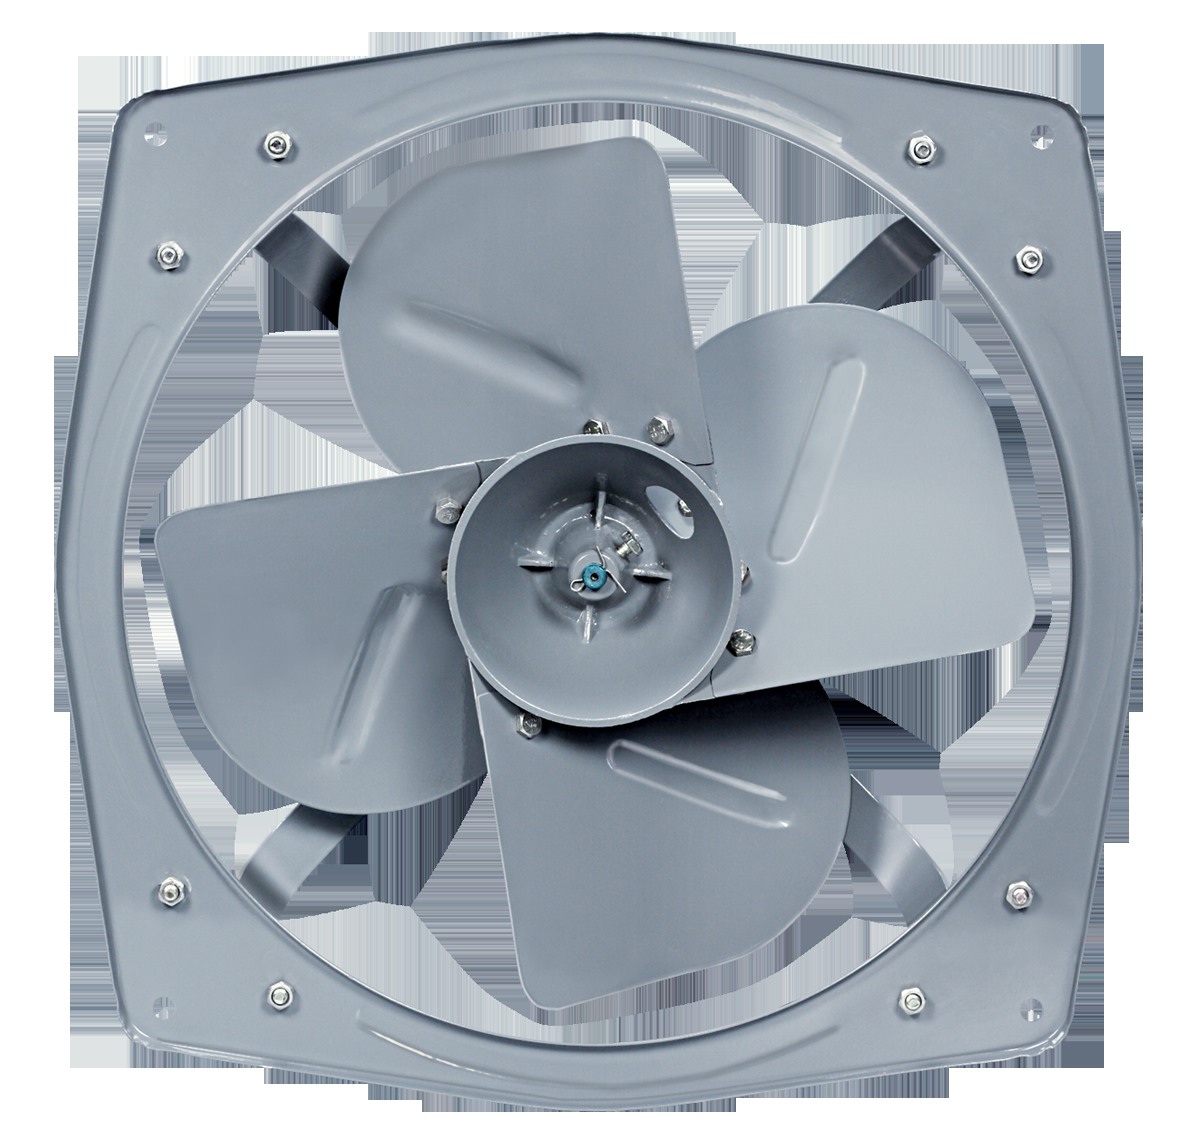 Havells Heavy Duty Exhaust Fan Turboforce 900 Rpm Havells within dimensions 1200 X 1140